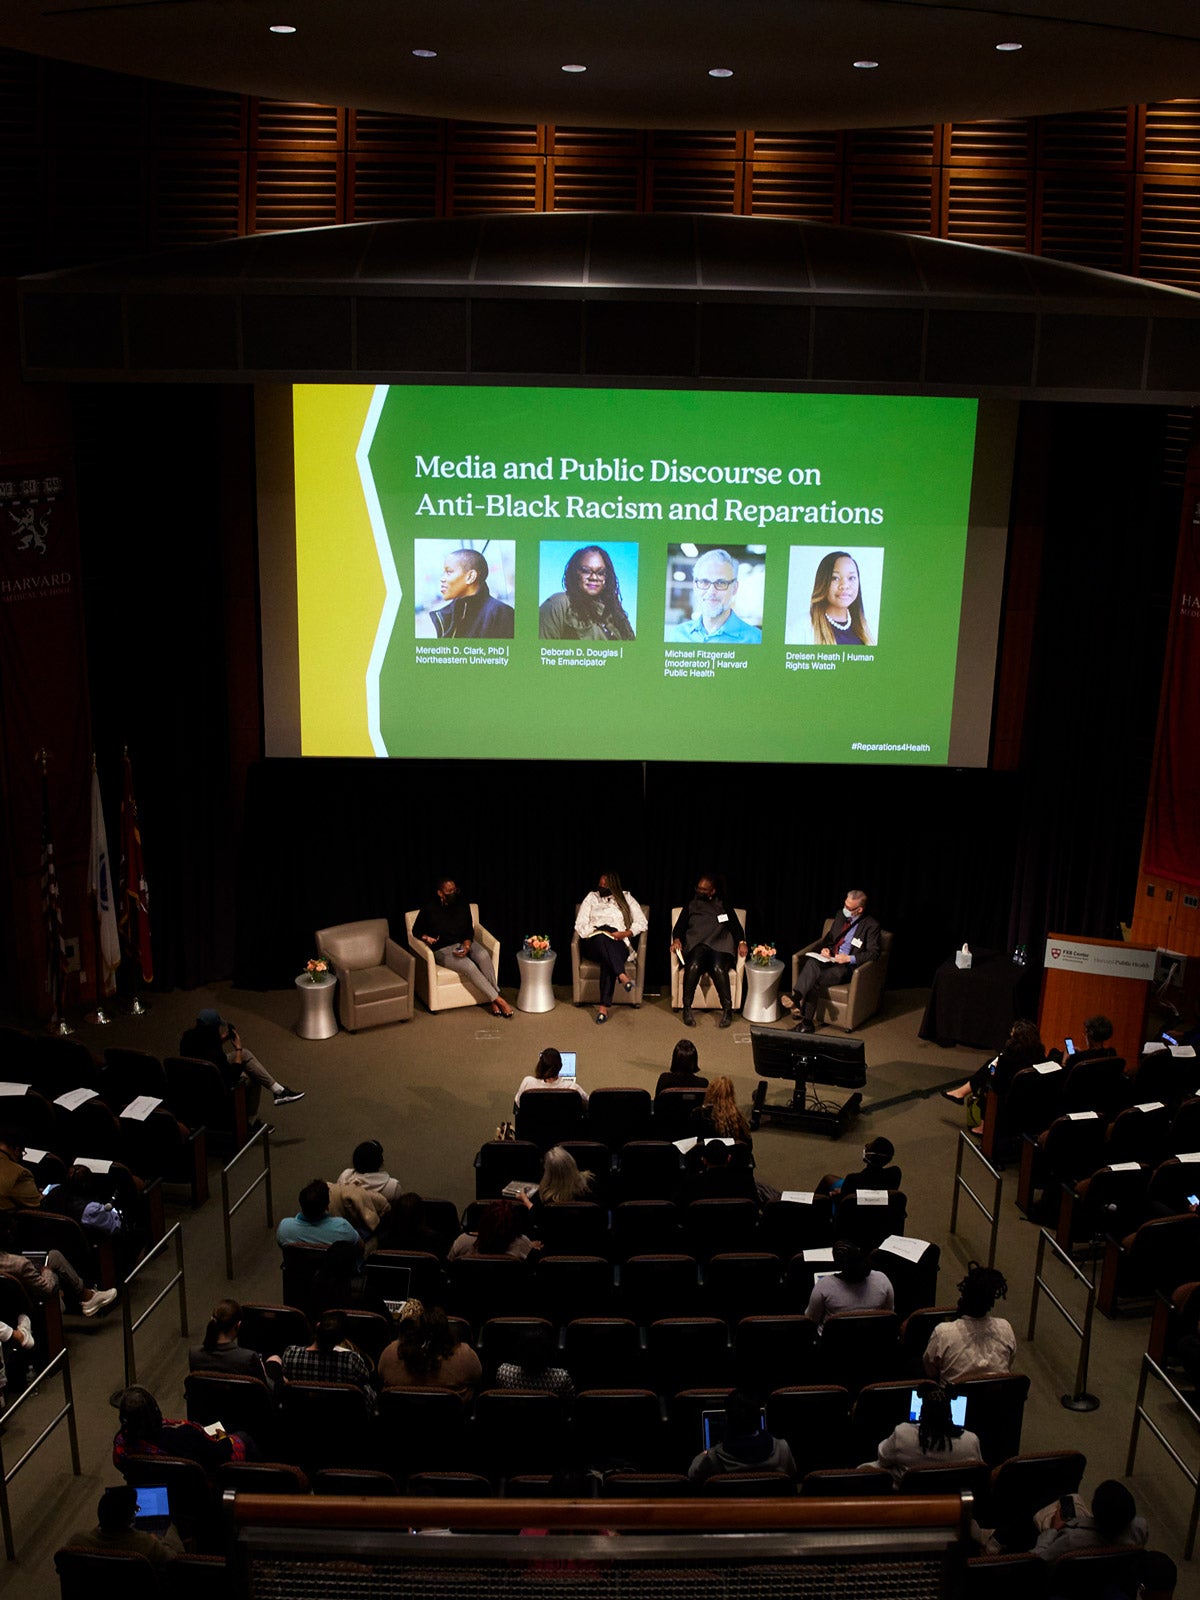 Four panelists sit in armchairs at the front of an auditorium. Behind them is a large screen with yellow and green color blocking, the title of the panel, and headshots of the four panelists (unlegible.)